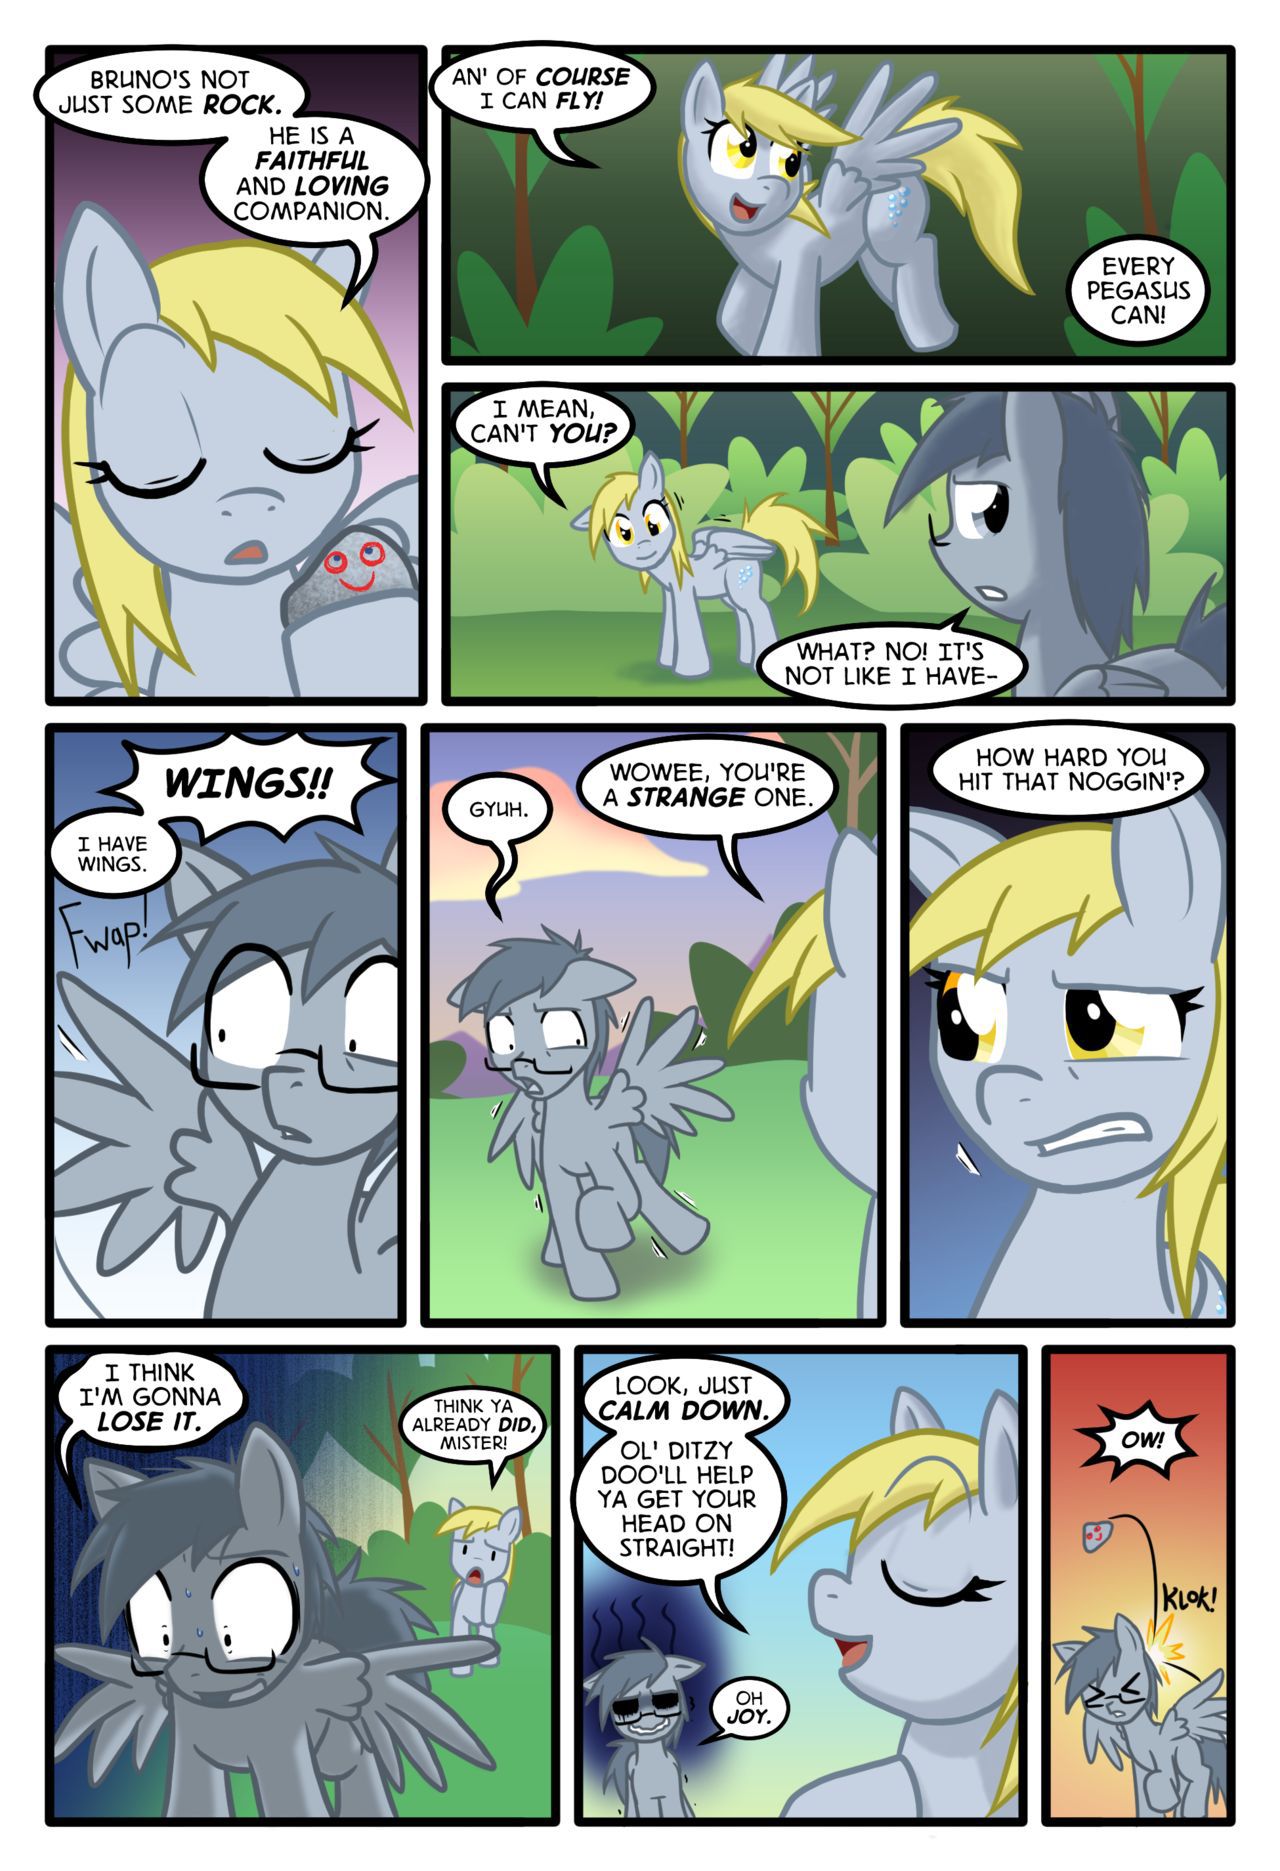 [Zaron] Lonely Hooves (My Little Pony Friendship Is Magic) [Ongoing] 9